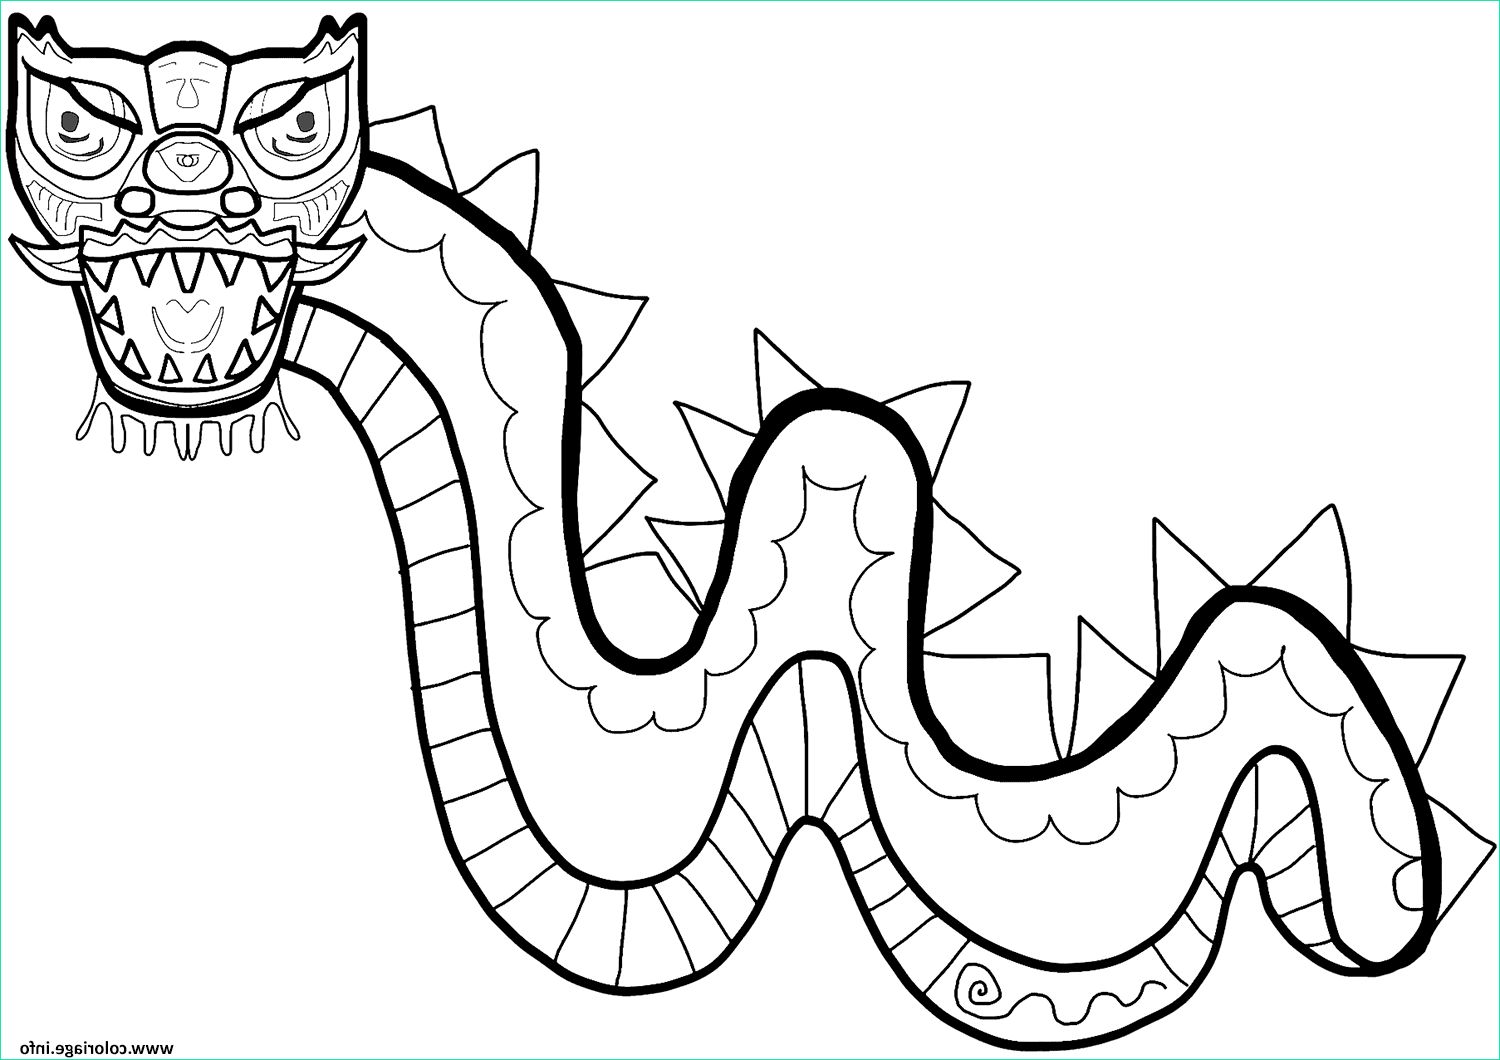 Dragon Chinois Coloriage Beau Collection Coloriage Fun Nouvel An Chinois Dragon Dessin Nouvel An